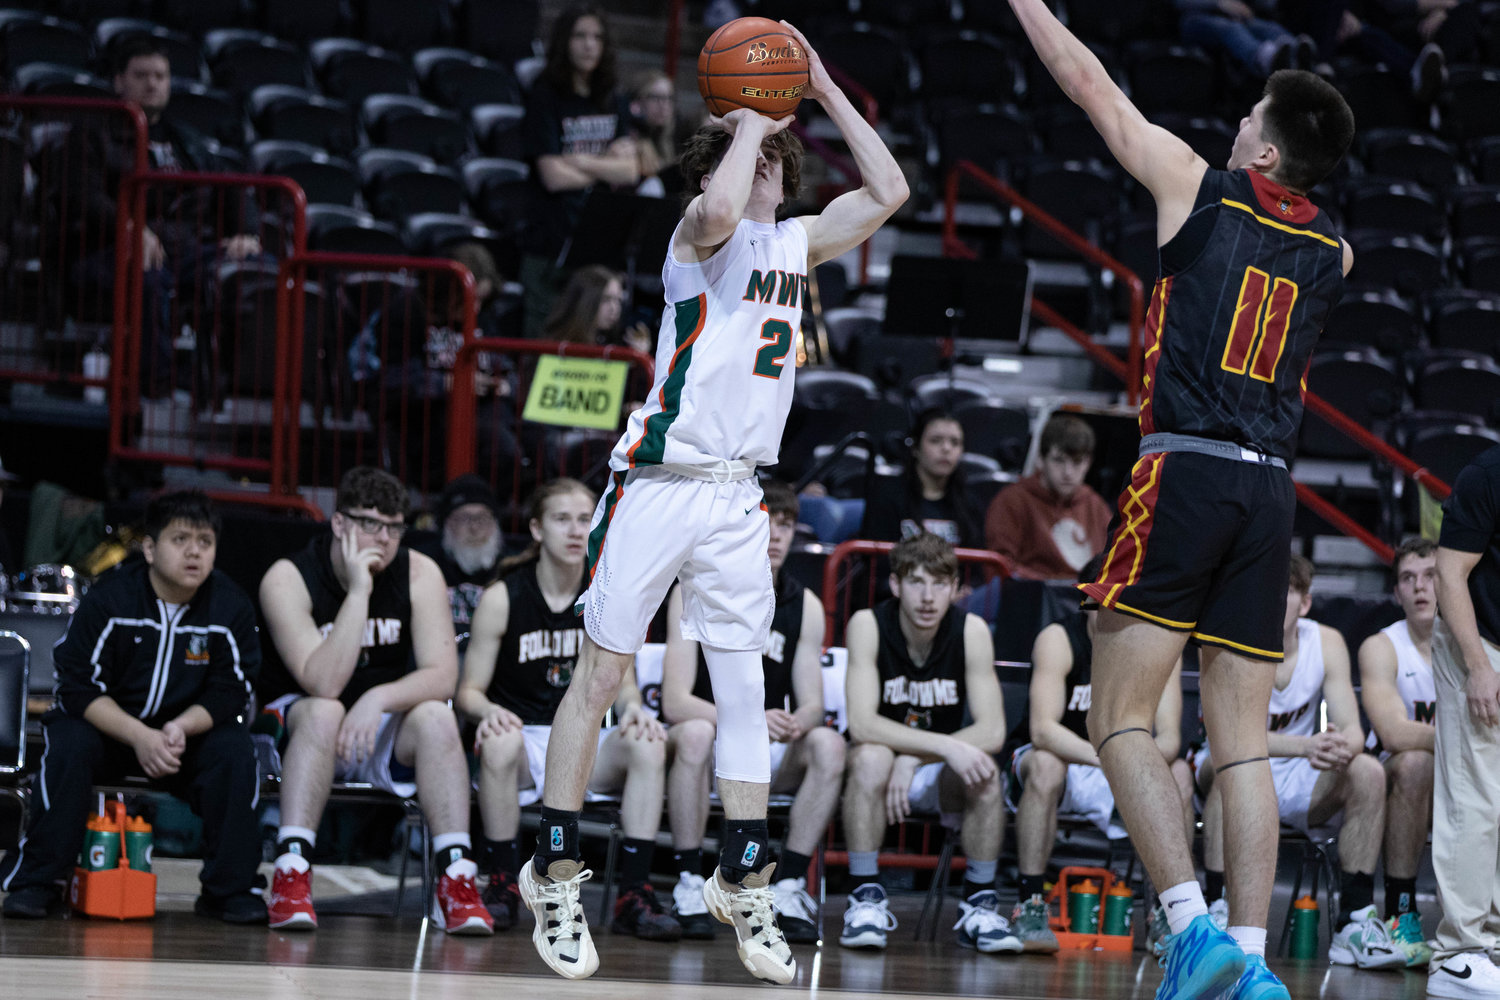 Morton-White Pass guard Judah Kelly rises for a long ball against Lake Roosevelt in the 2B state fourth-place game at Spokane Arena March 3.